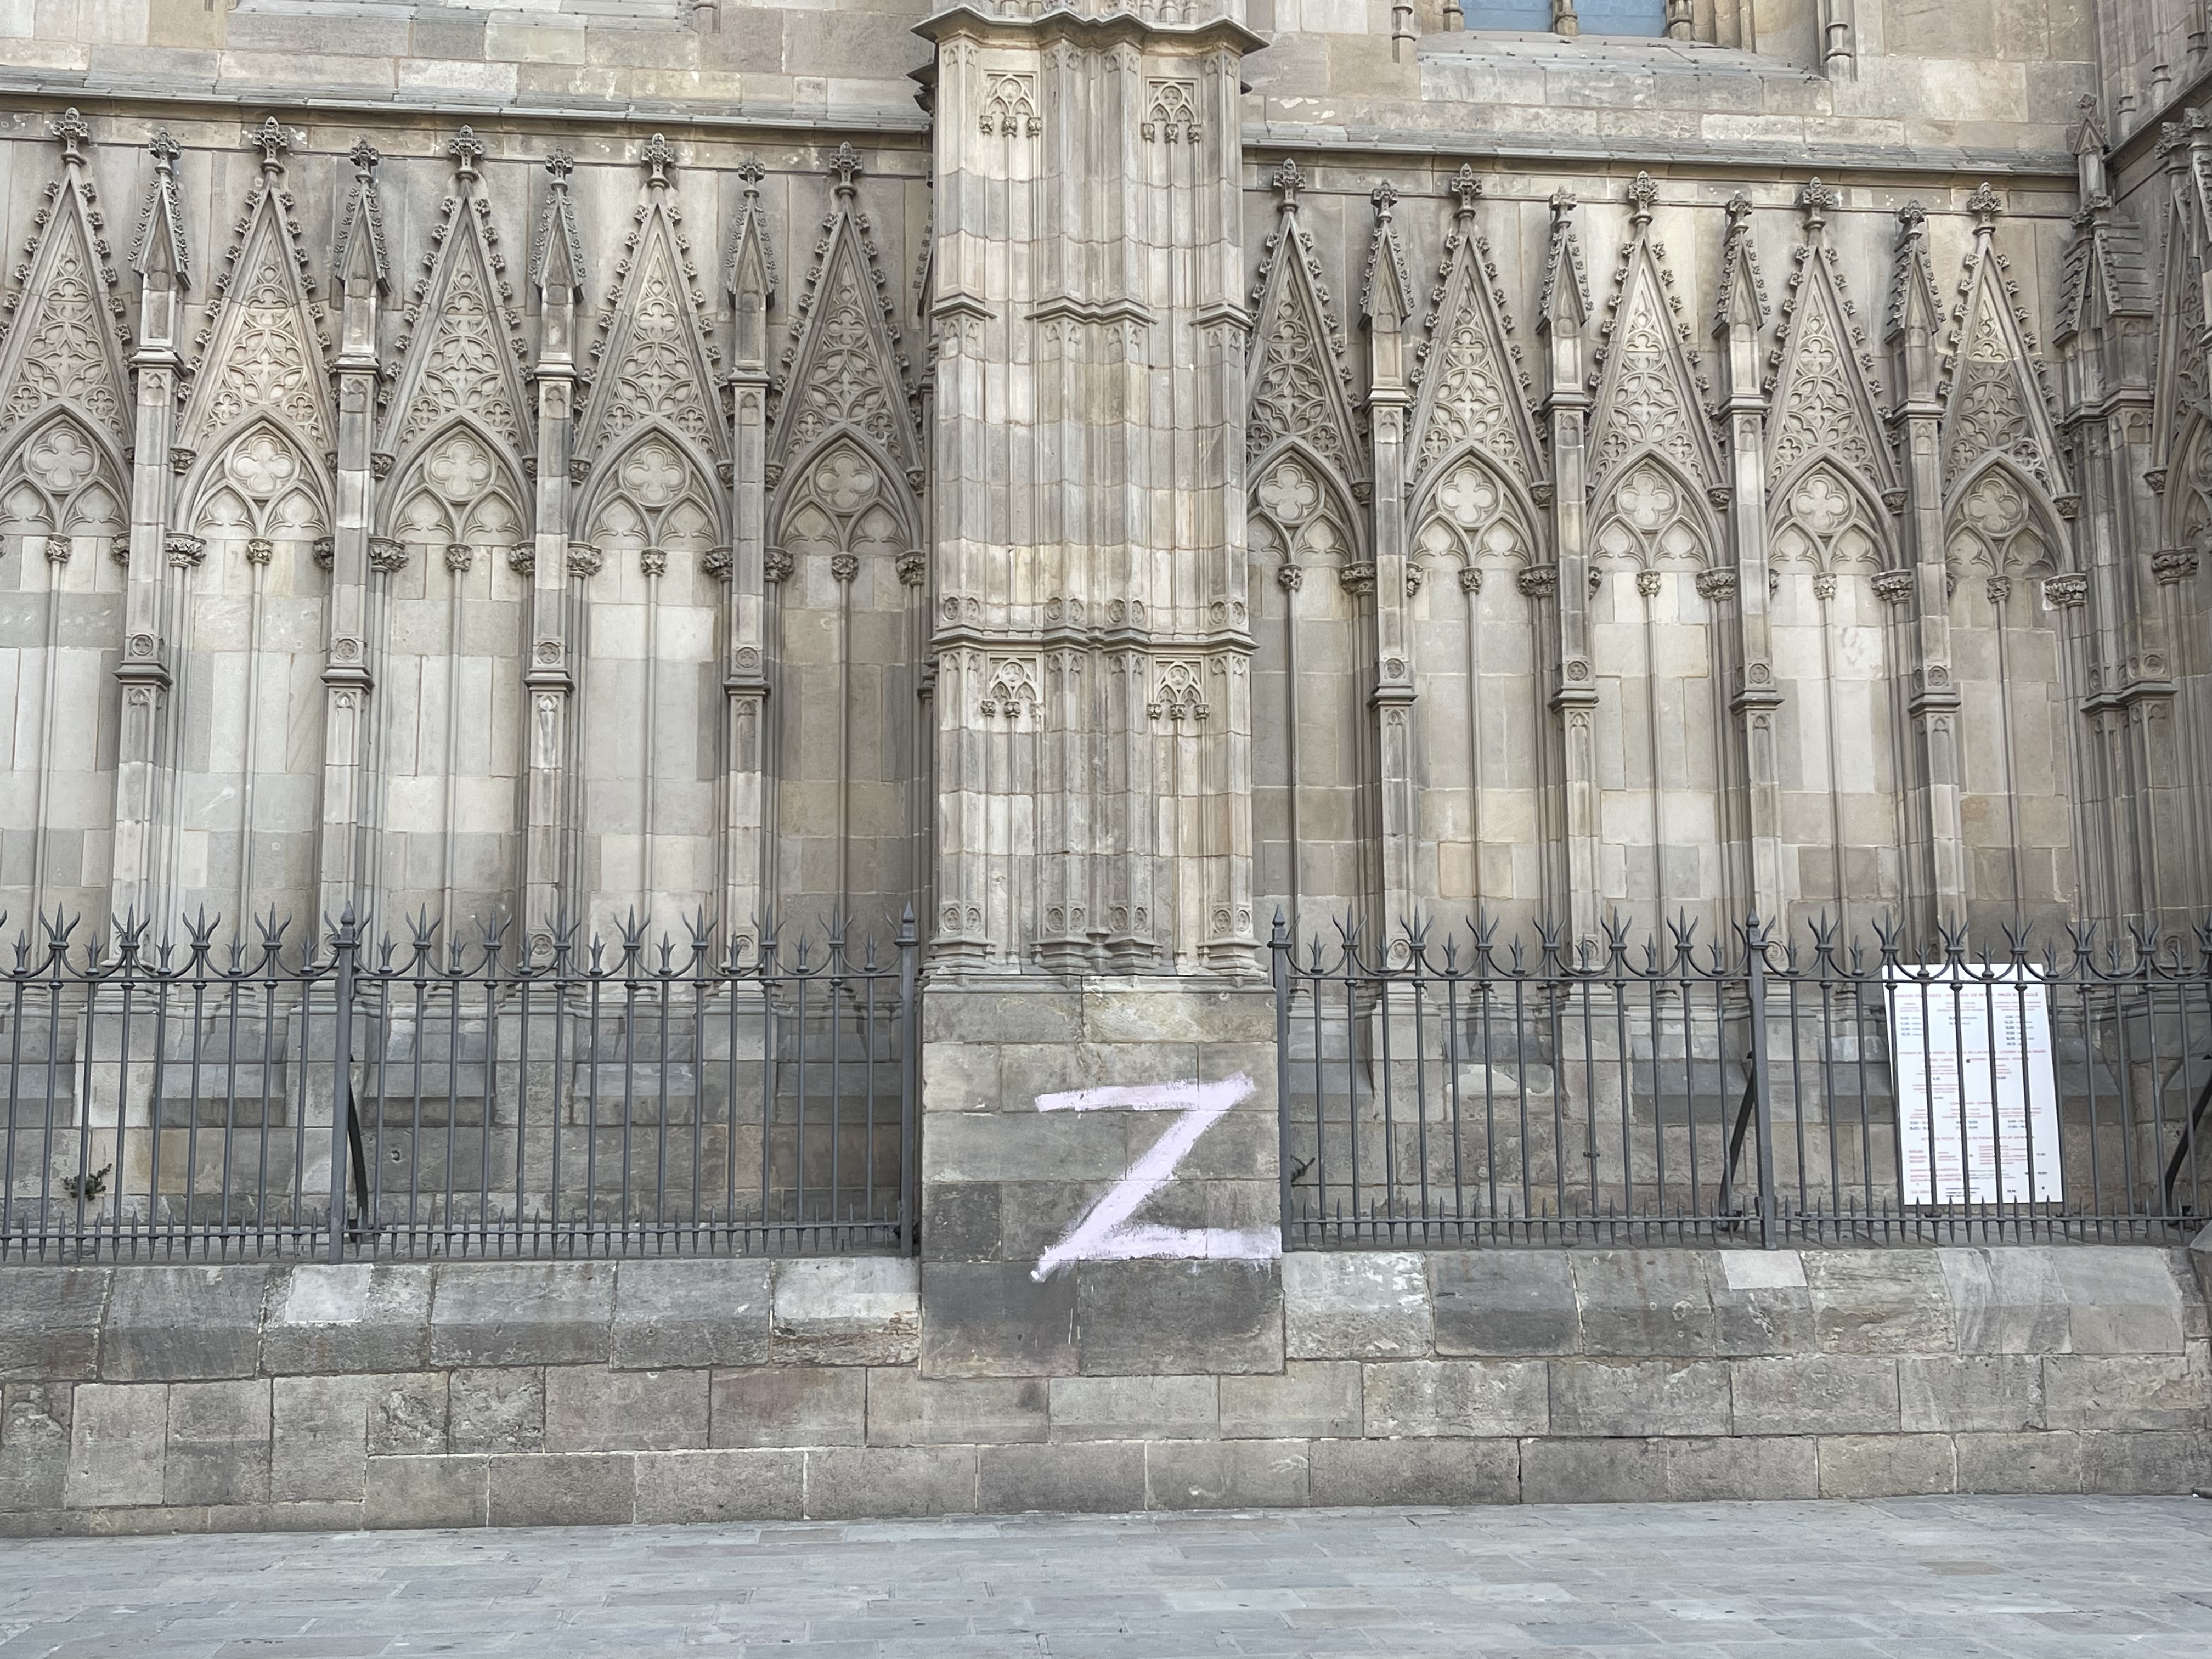 Barcelona cathedral with a Russian pro-war 'Z' symbol graffitied on it (by Cillian Shields)